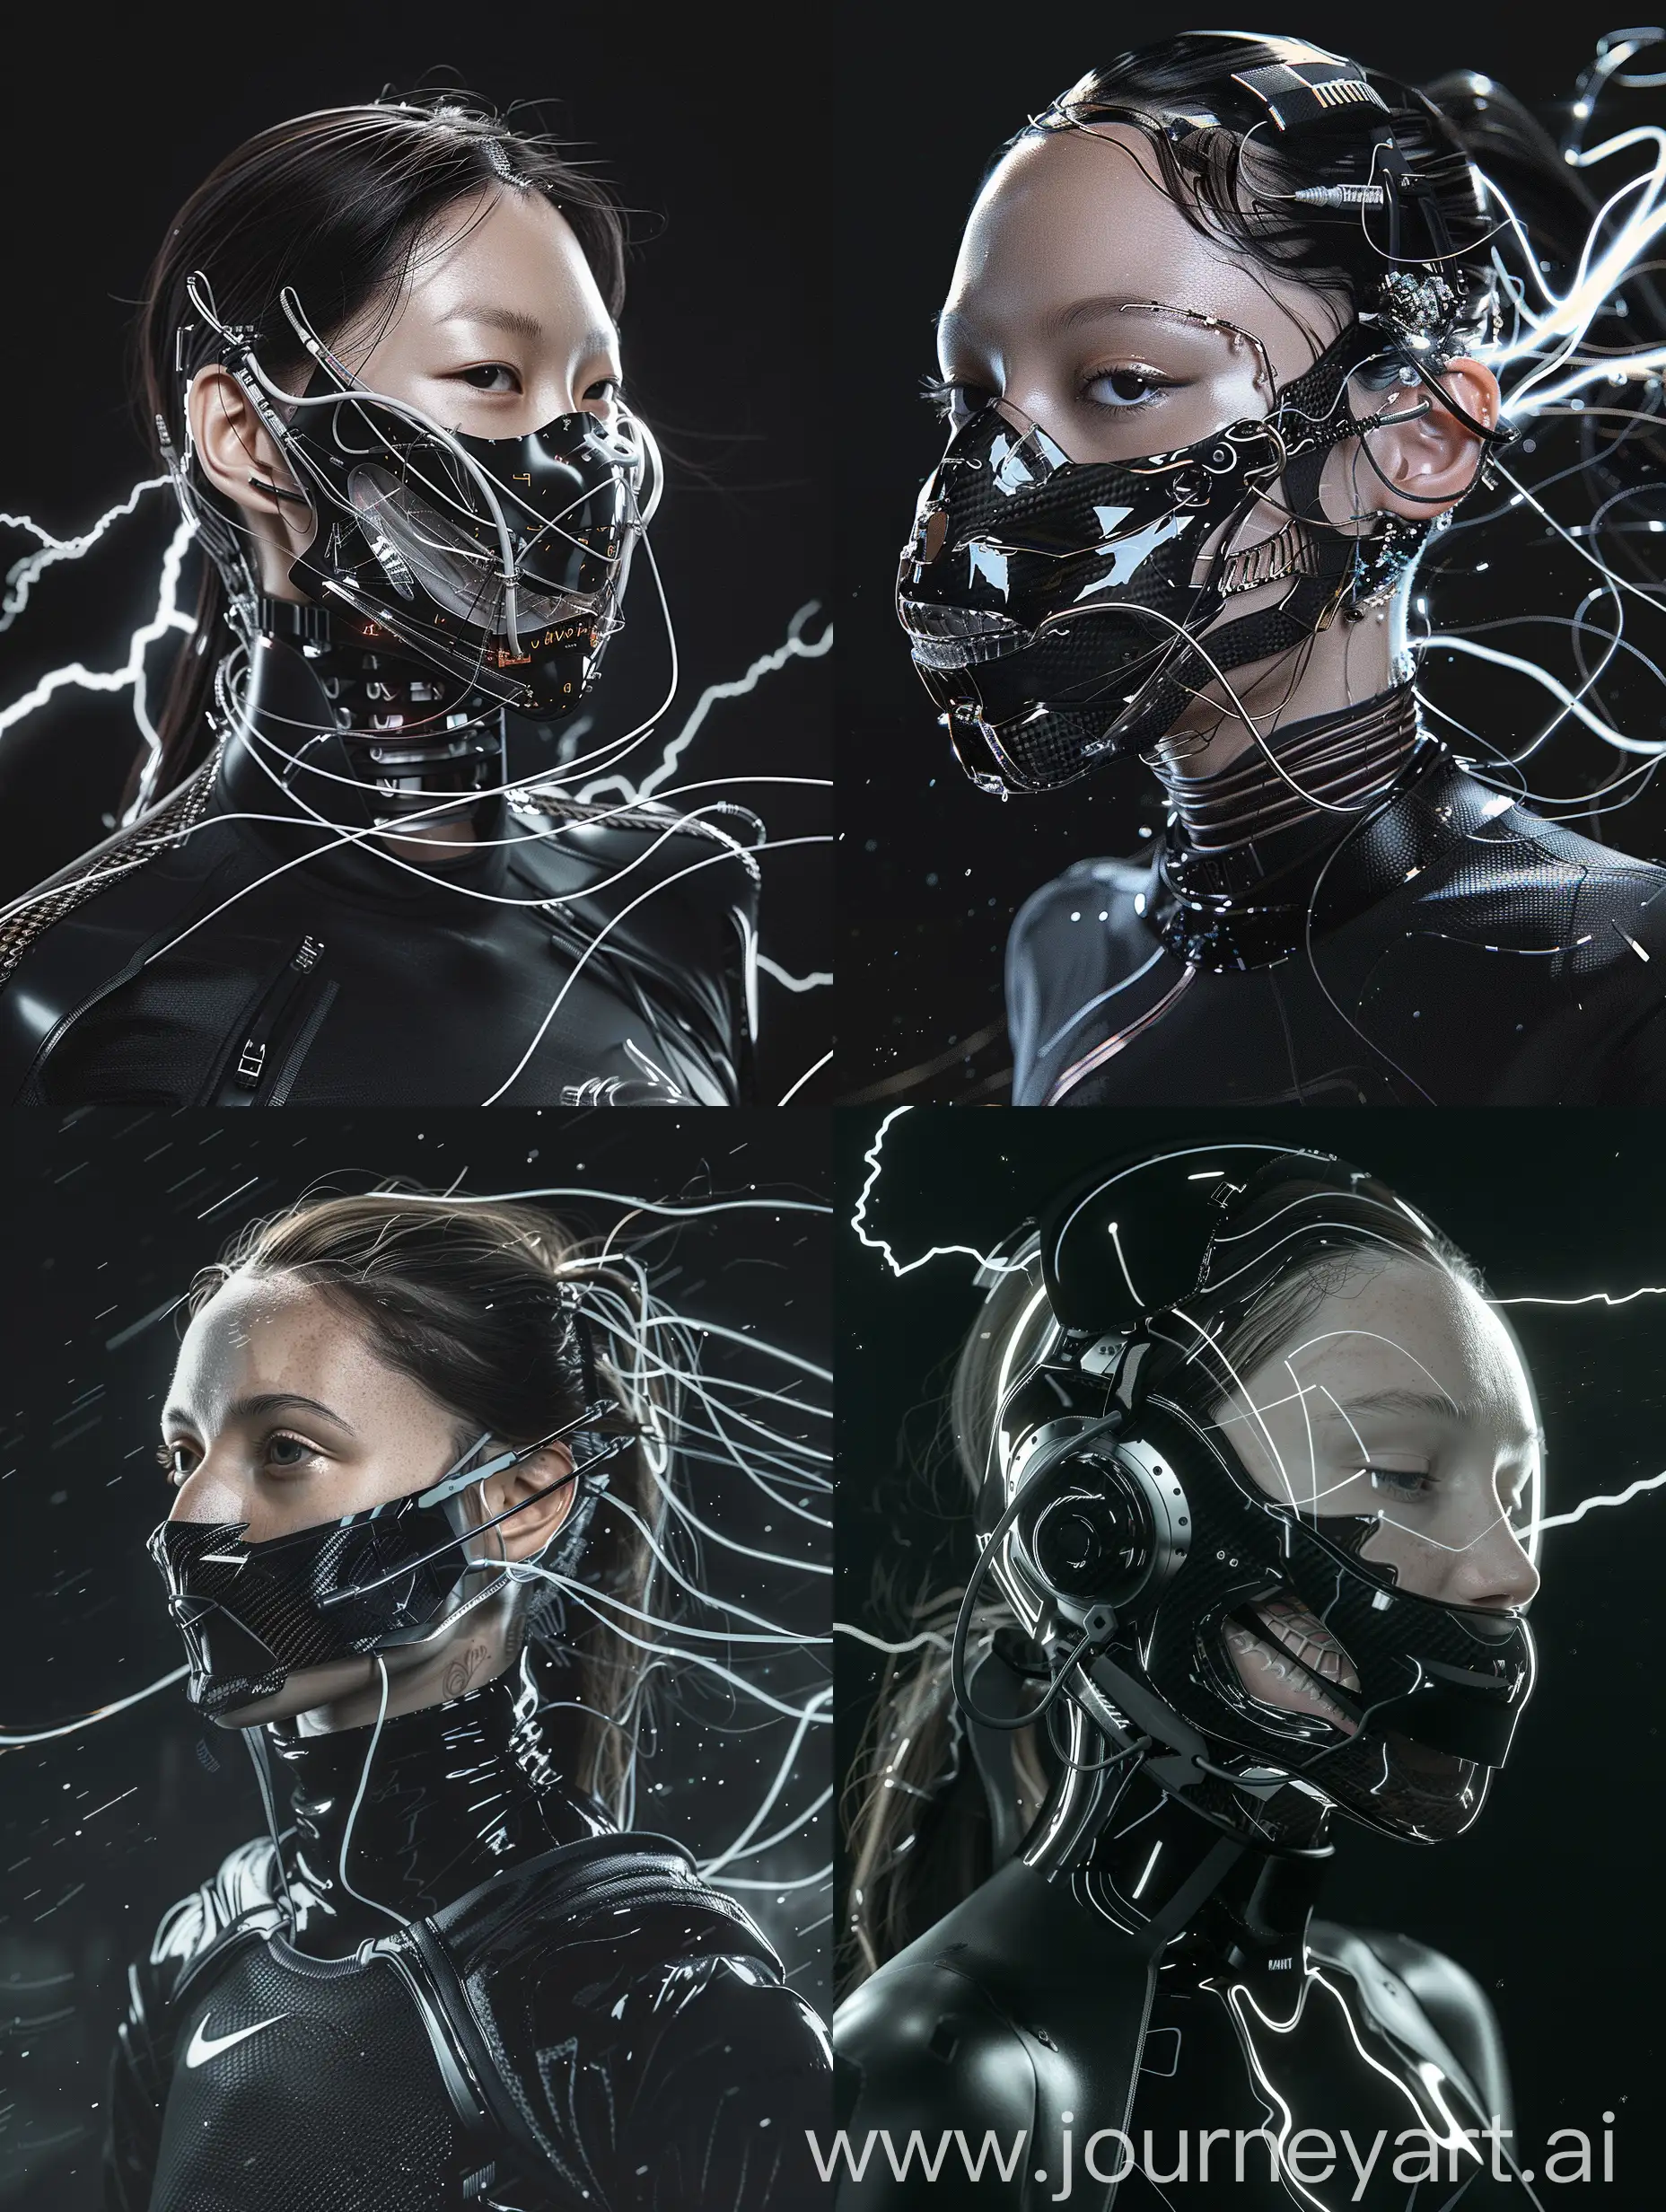 Futuristic-Cyberpunk-Character-with-Intricate-Cybernetic-Mask-and-NikeInspired-Accessories